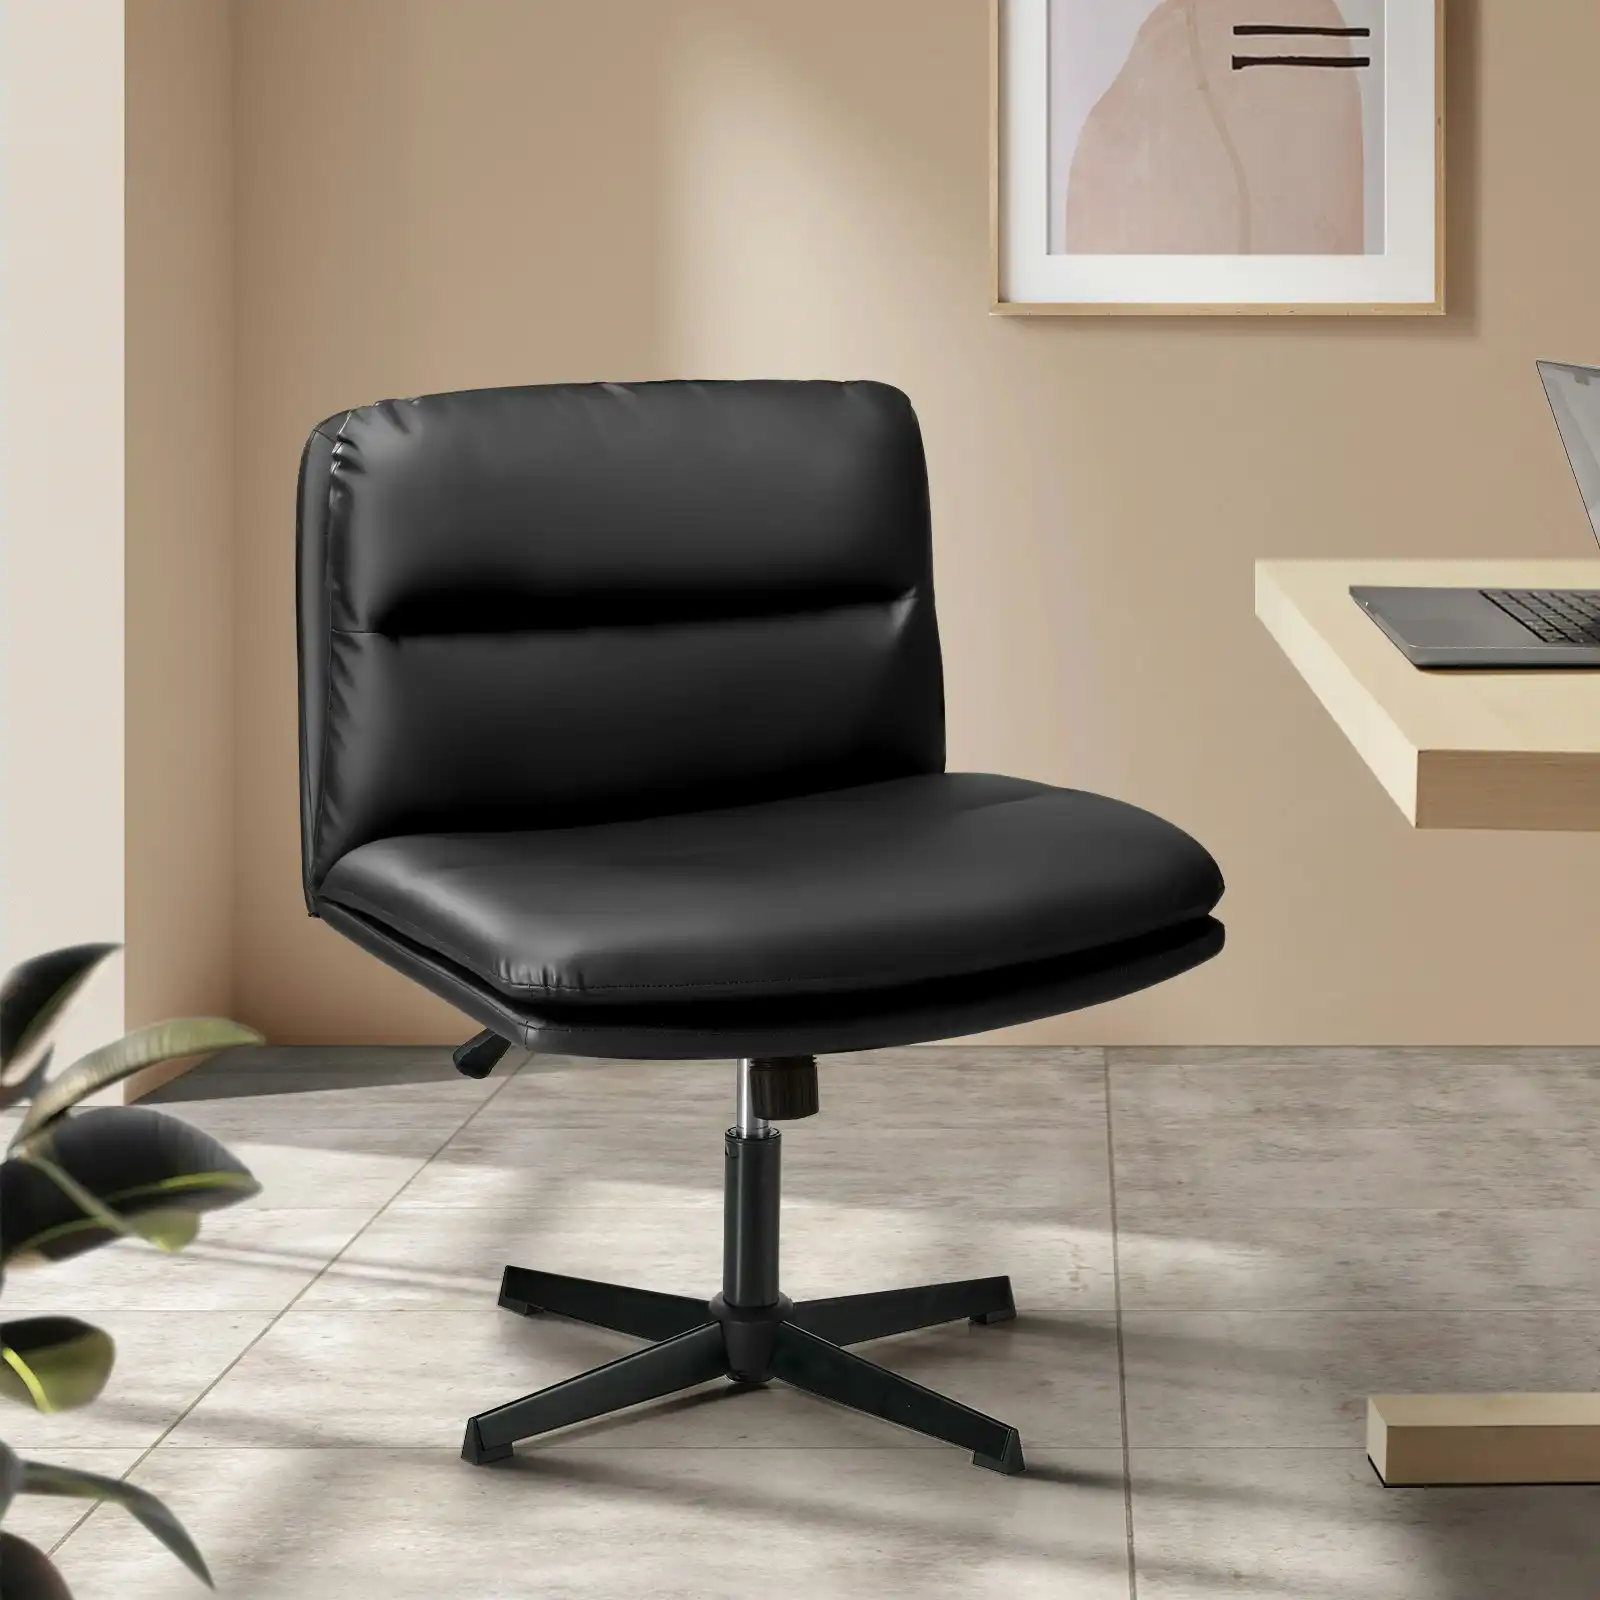 Oikiture Mid Back Armless Office Desk Chair Wide Seat No Wheels Leather Black